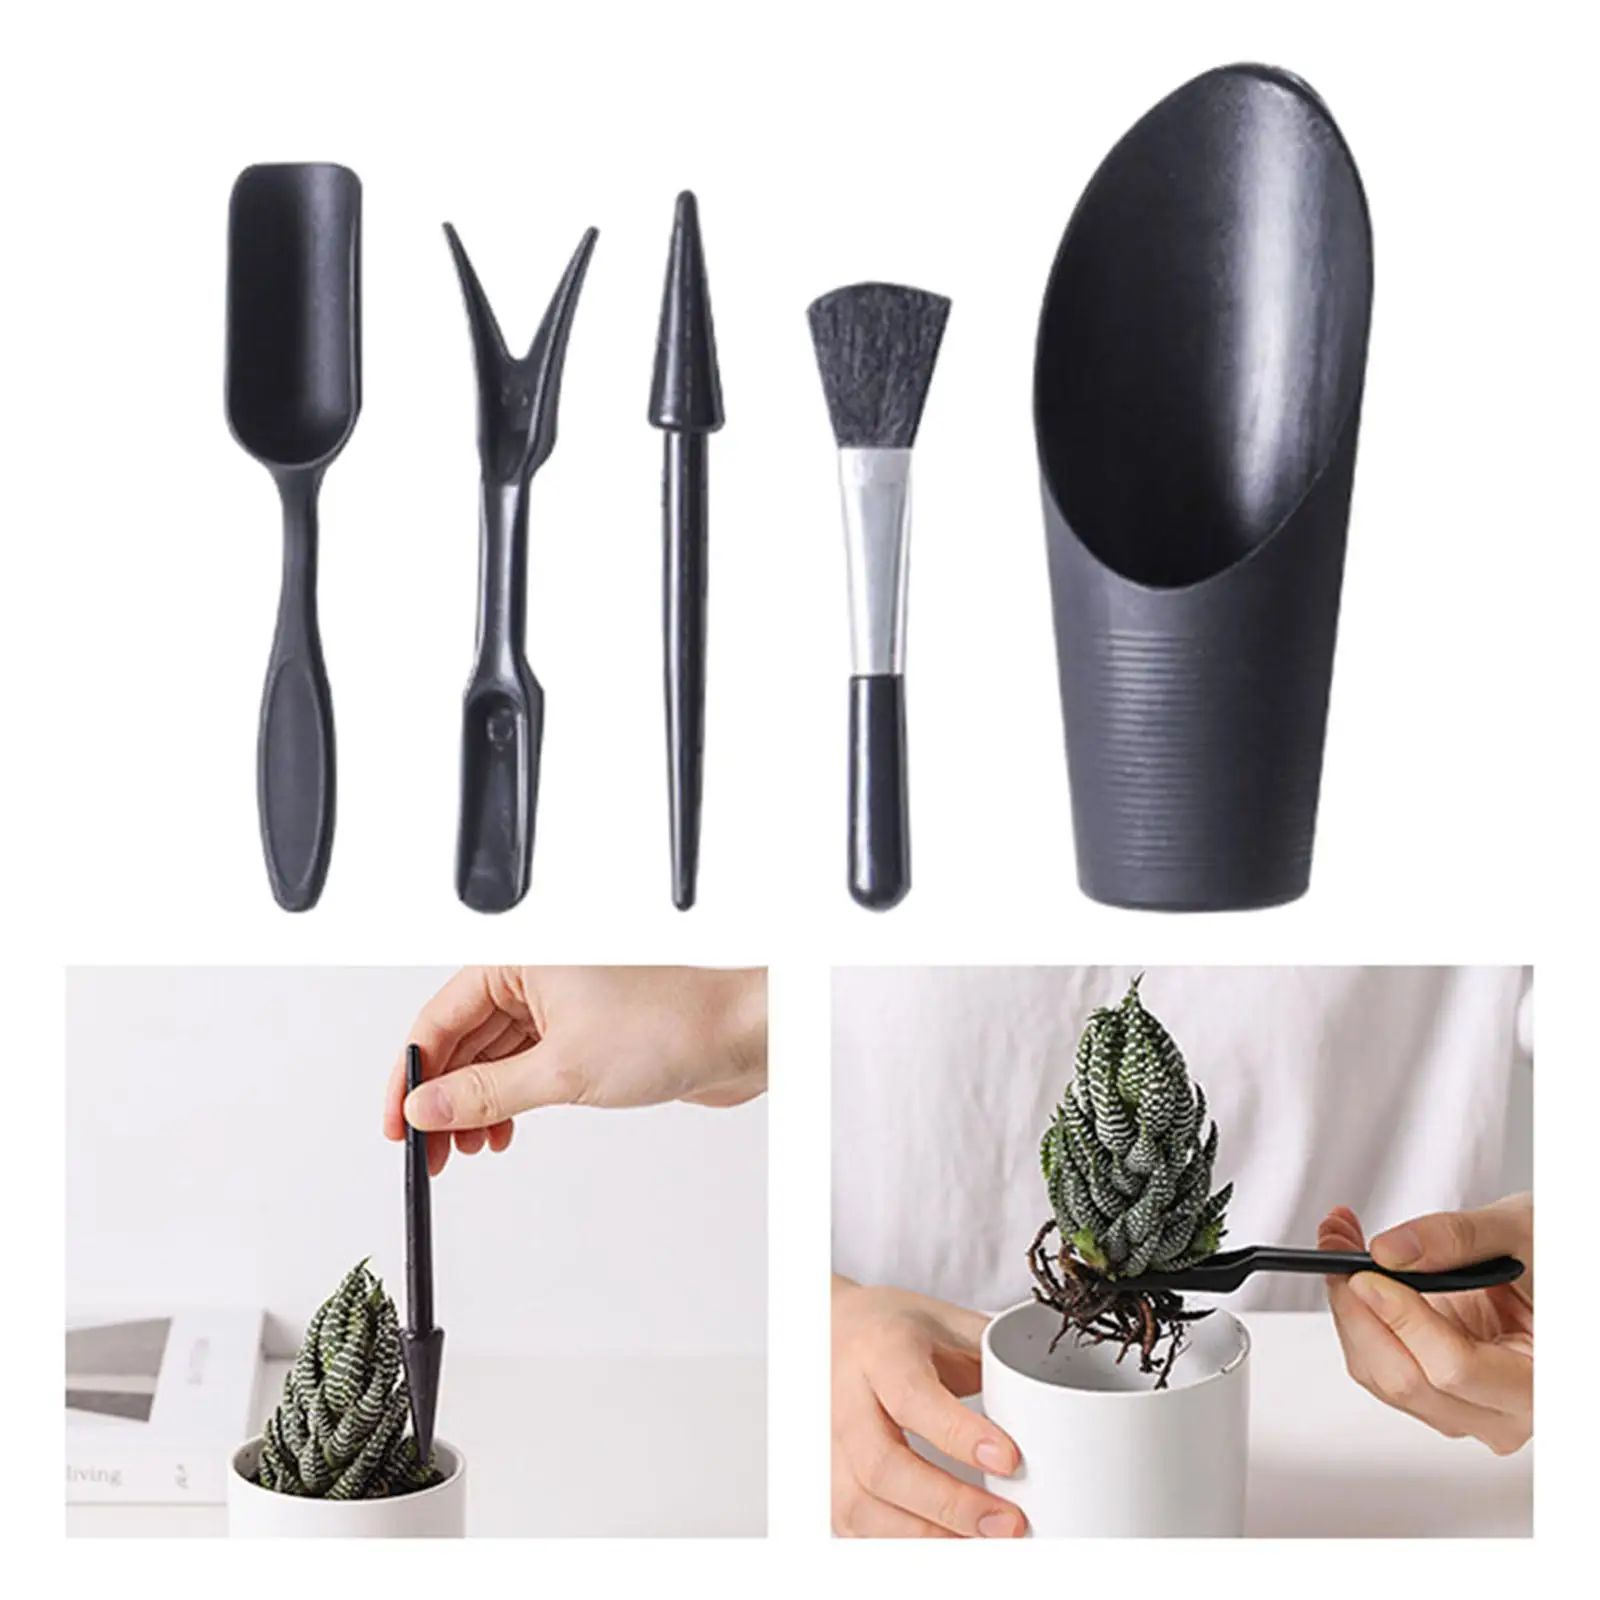 Mini Garden Succulent Transplanting Tools 5 Pieces for Miniature Planting Accessory Lightweight Simple to Use Professional